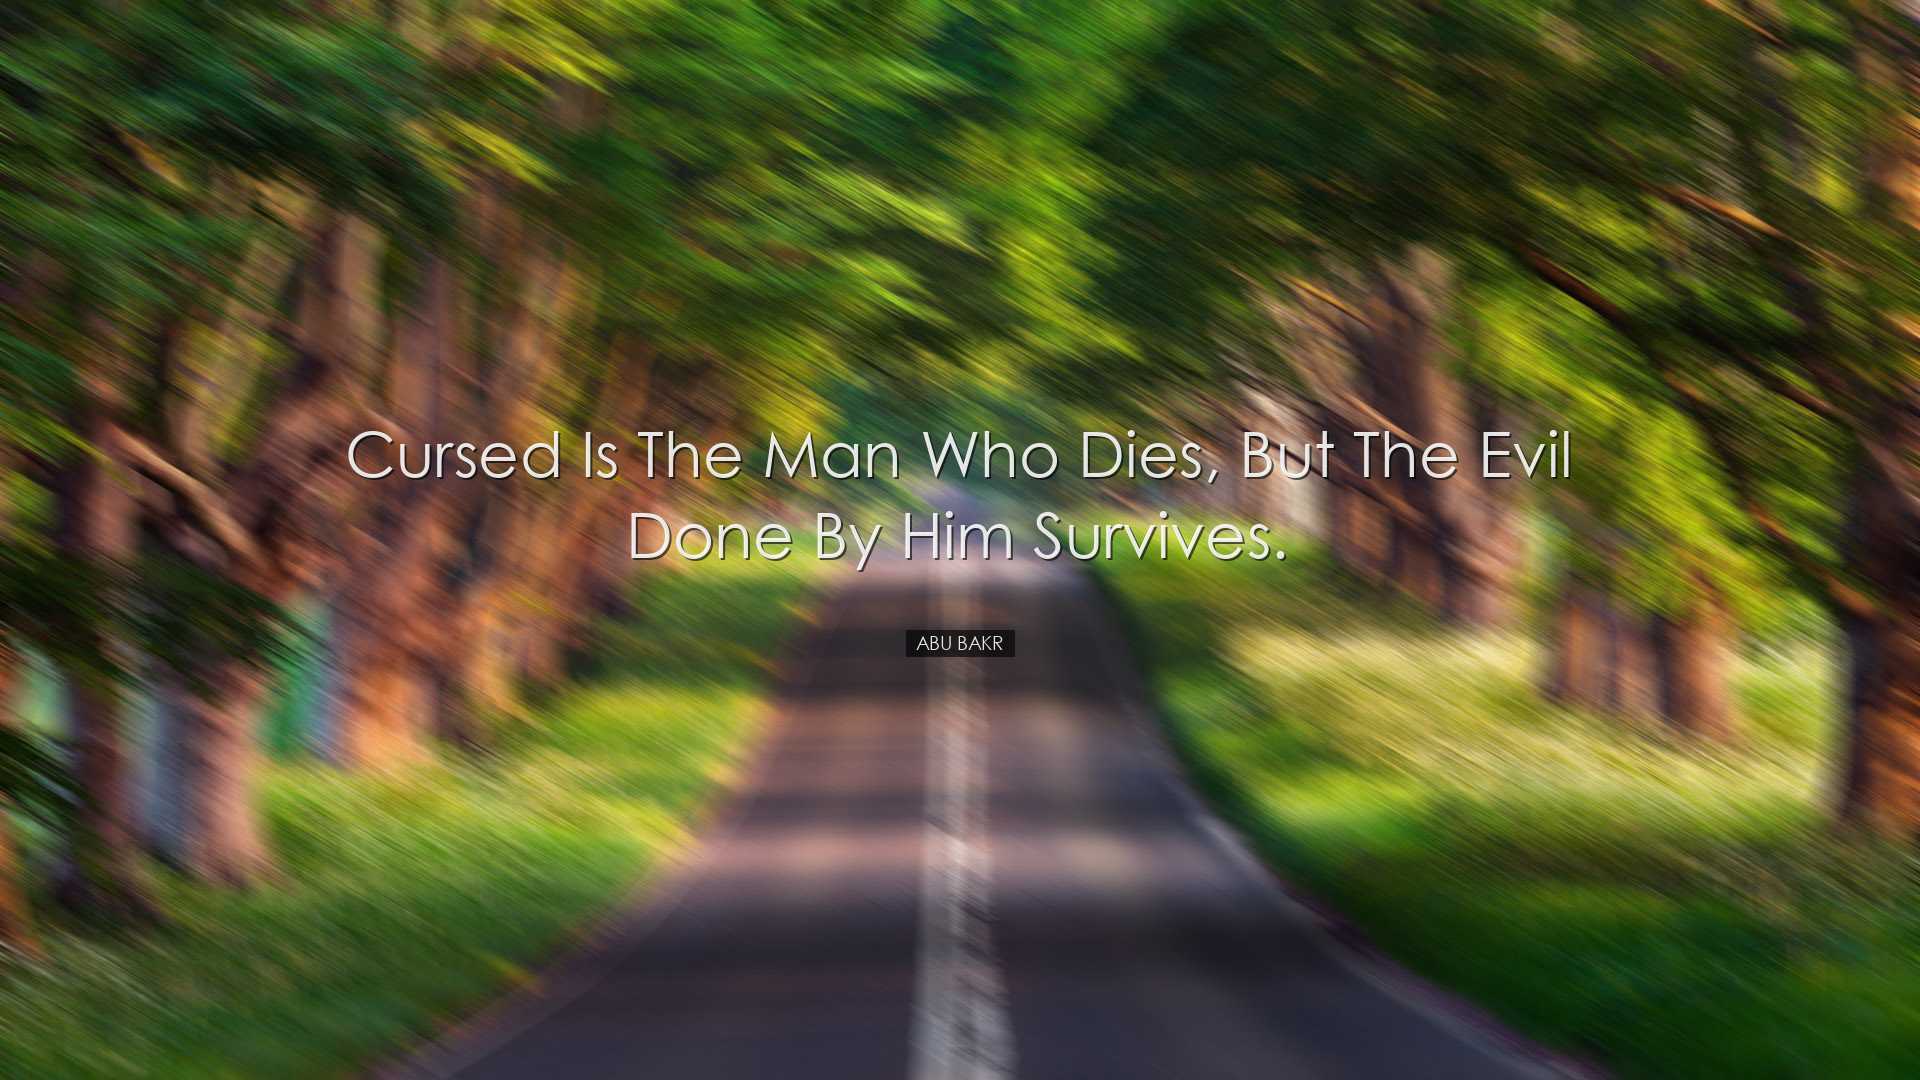 Cursed is the man who dies, but the evil done by him survives. - A